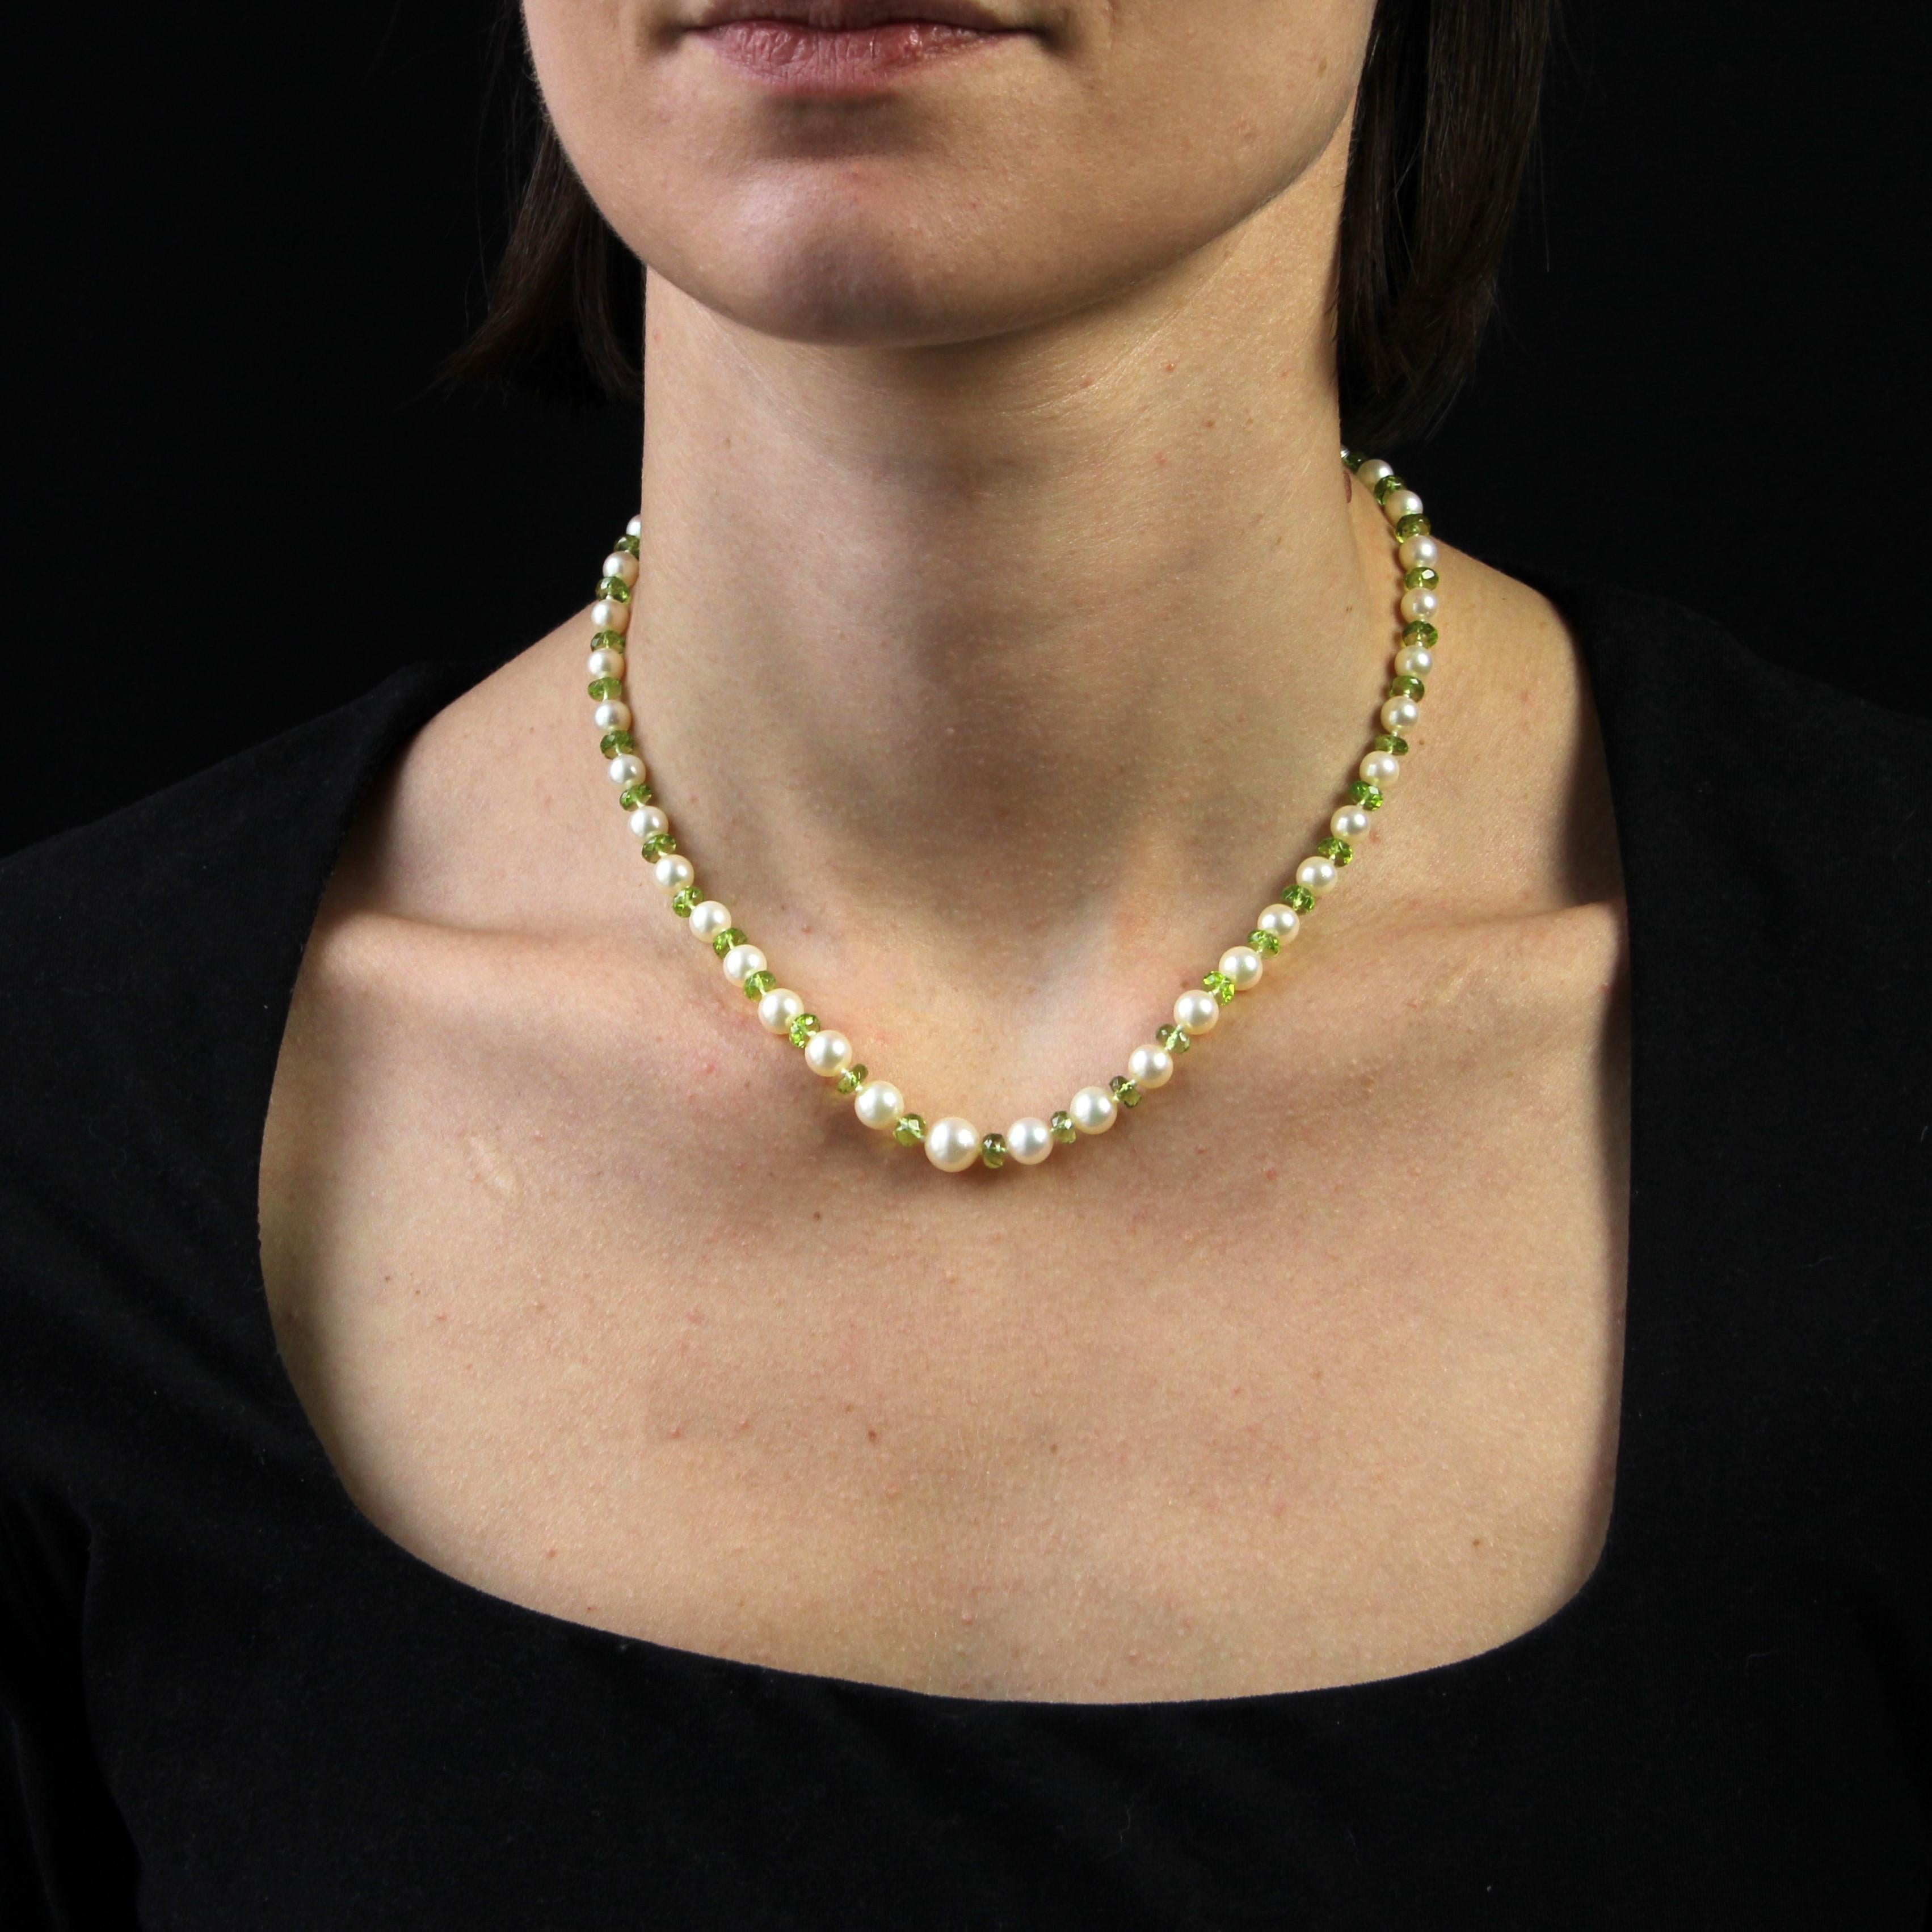 Baume Creation.
Necklace featuring a drop of round pearly white cultured pearls alternating with faceted peridot beads. The clasp is a ratchet with 8 safety catches decorated with gadroons. It is made of 18k yellow gold.
Length : 42 cm